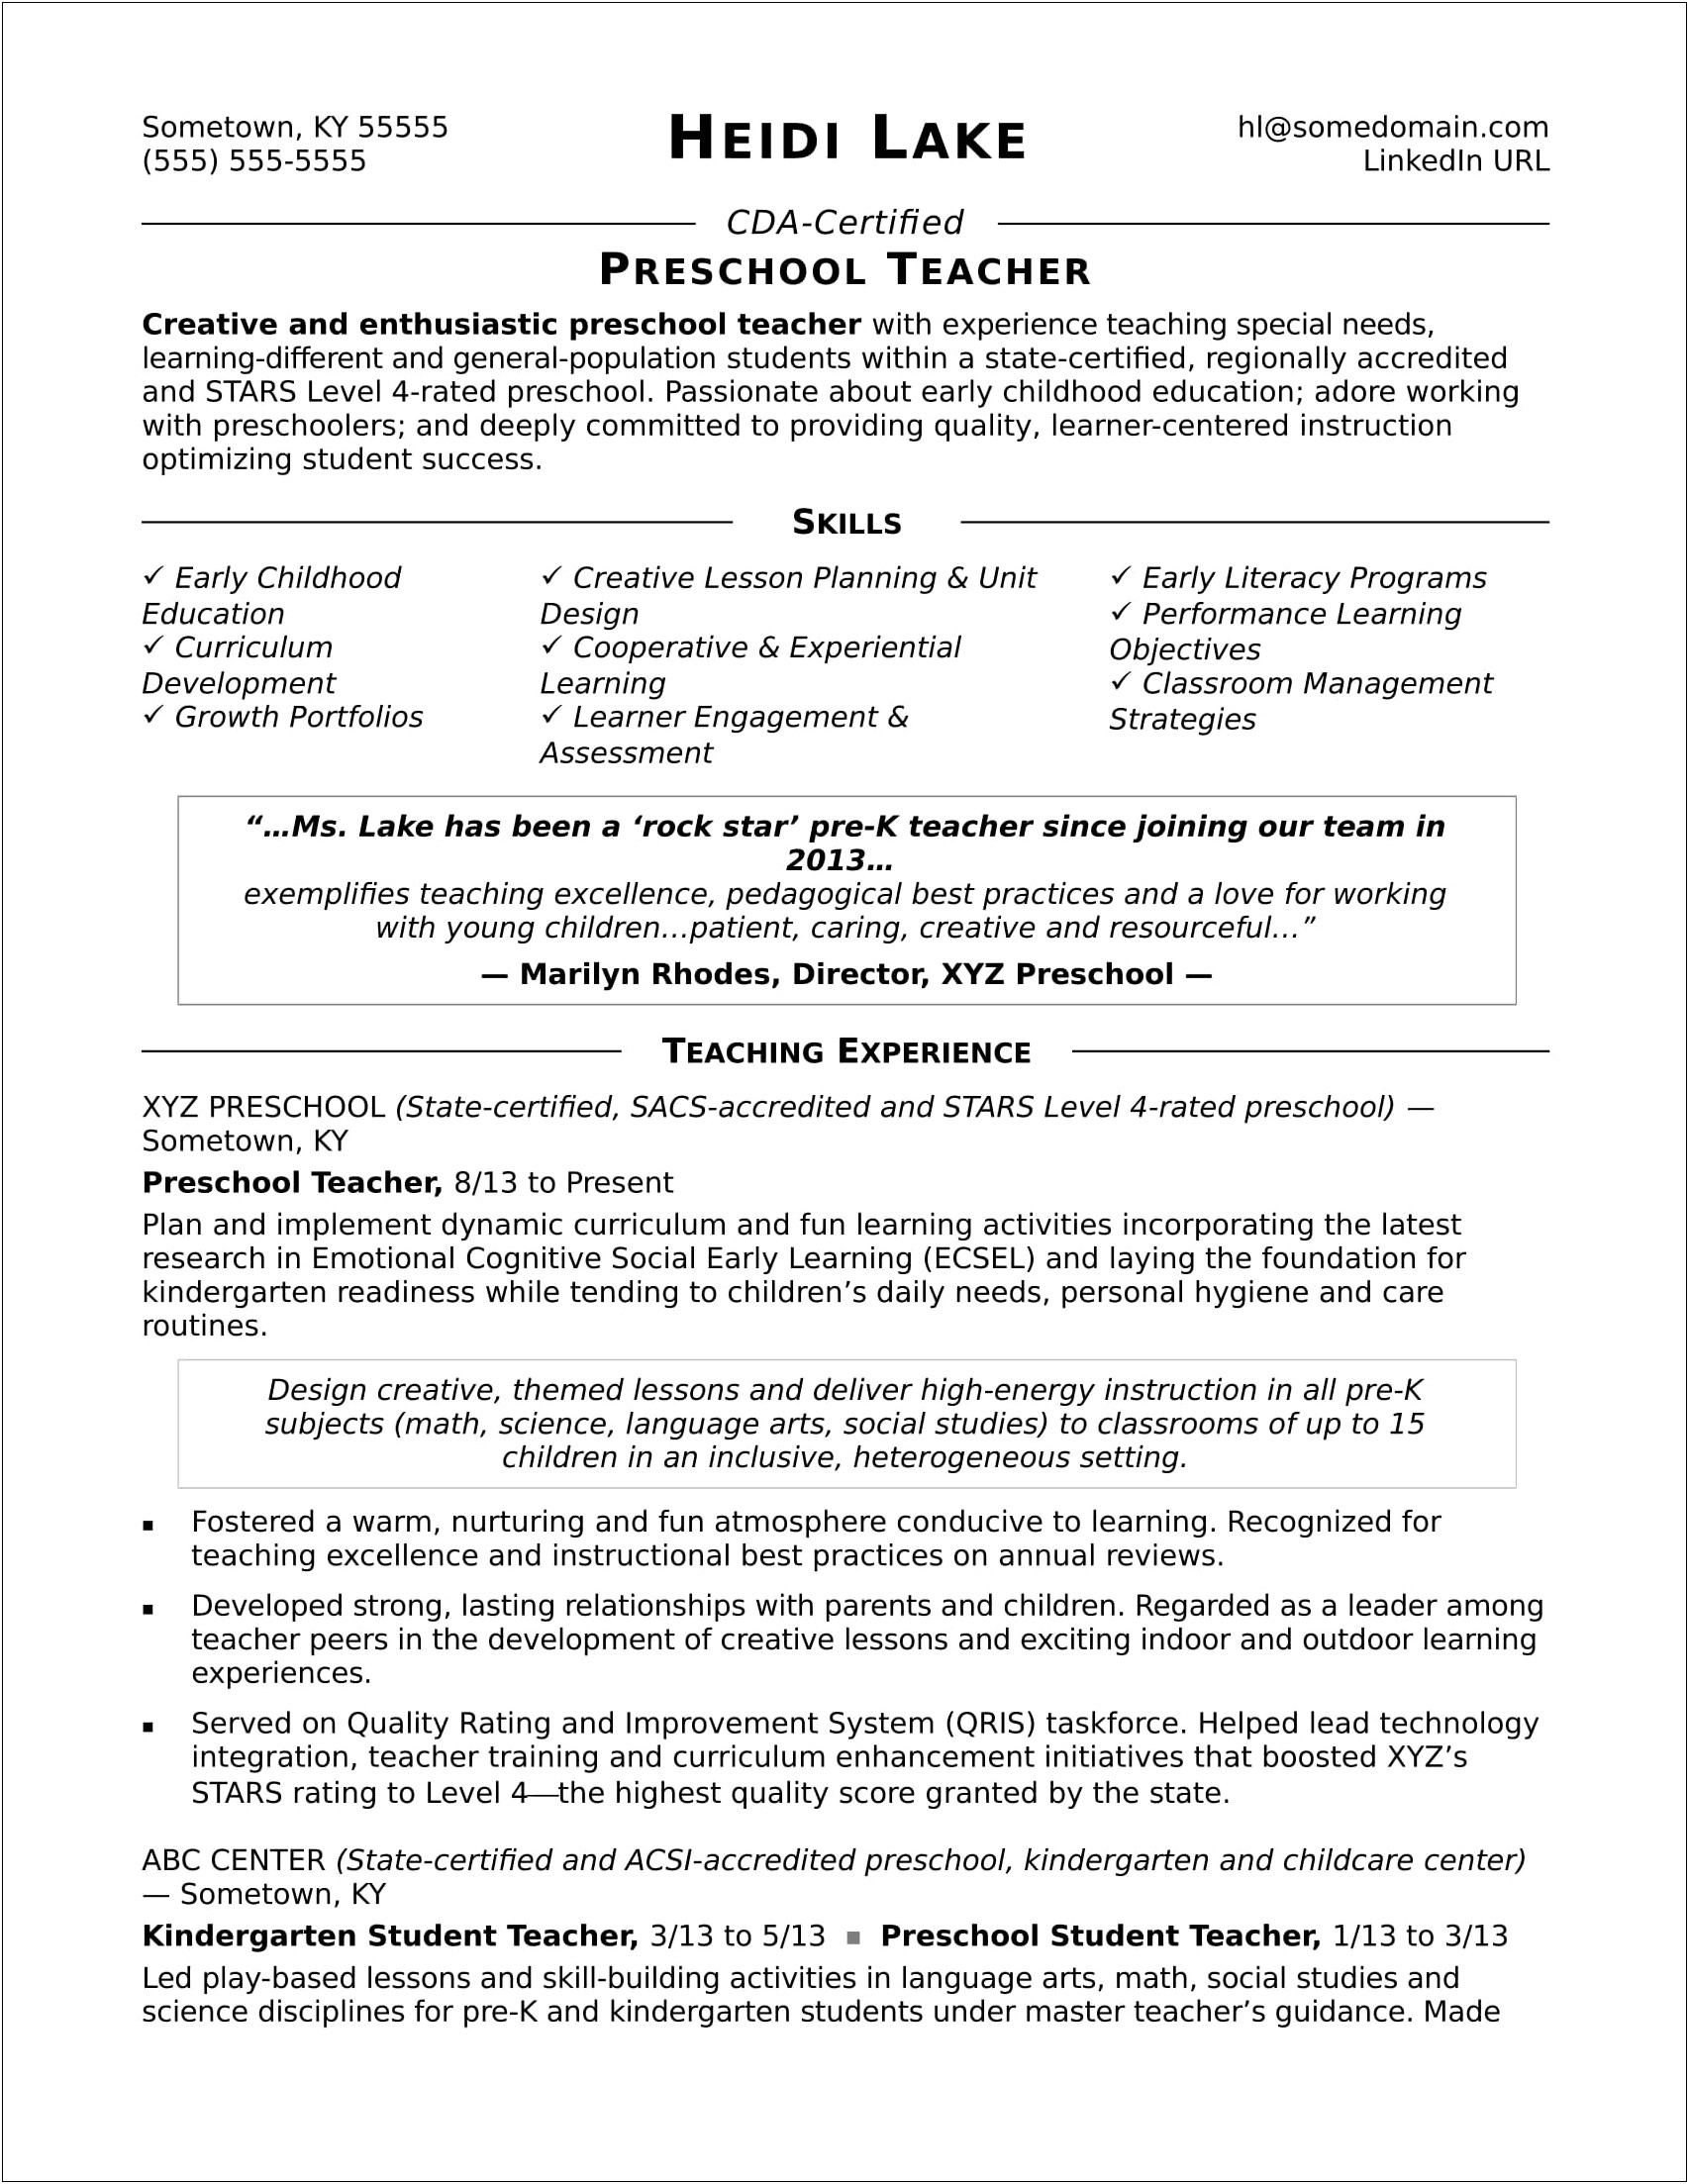 Sample Resume For Child Care Support Worker